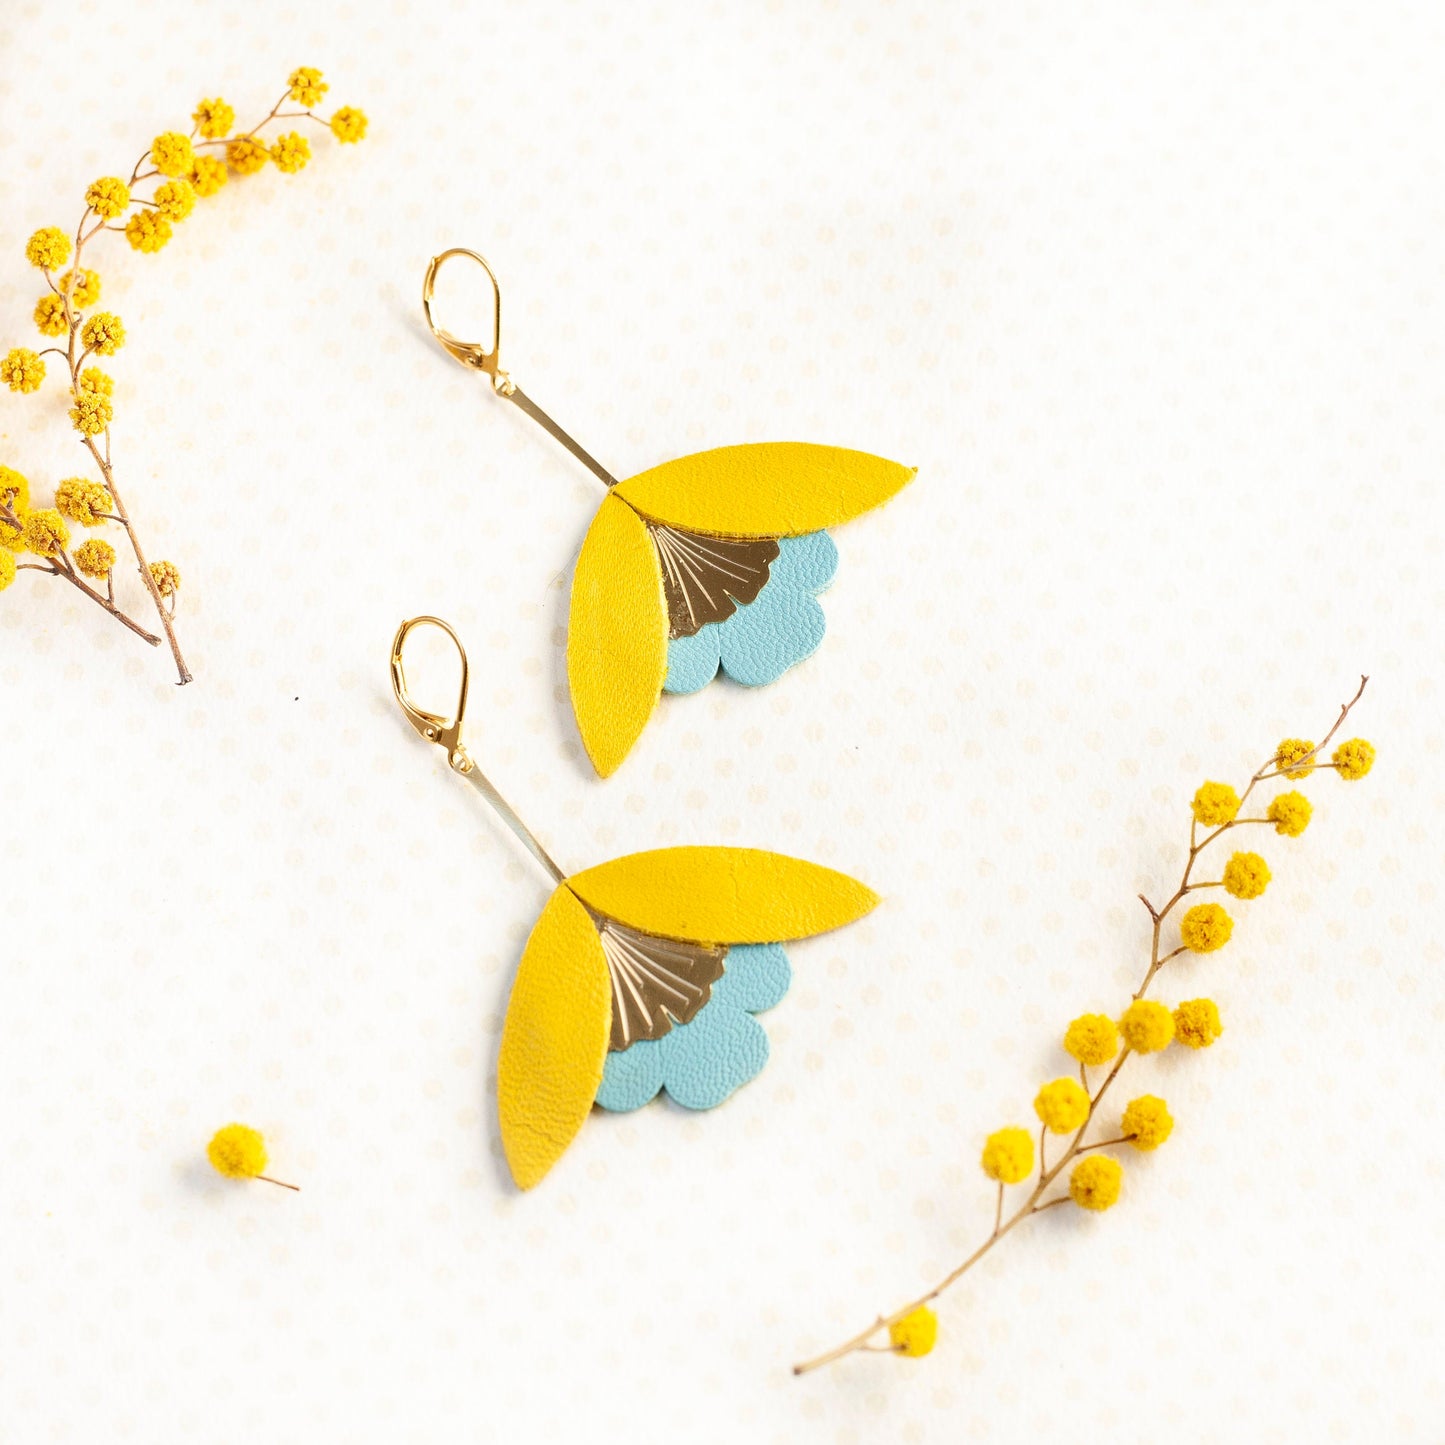 Ginkgo Flower earrings in yellow and blue leather